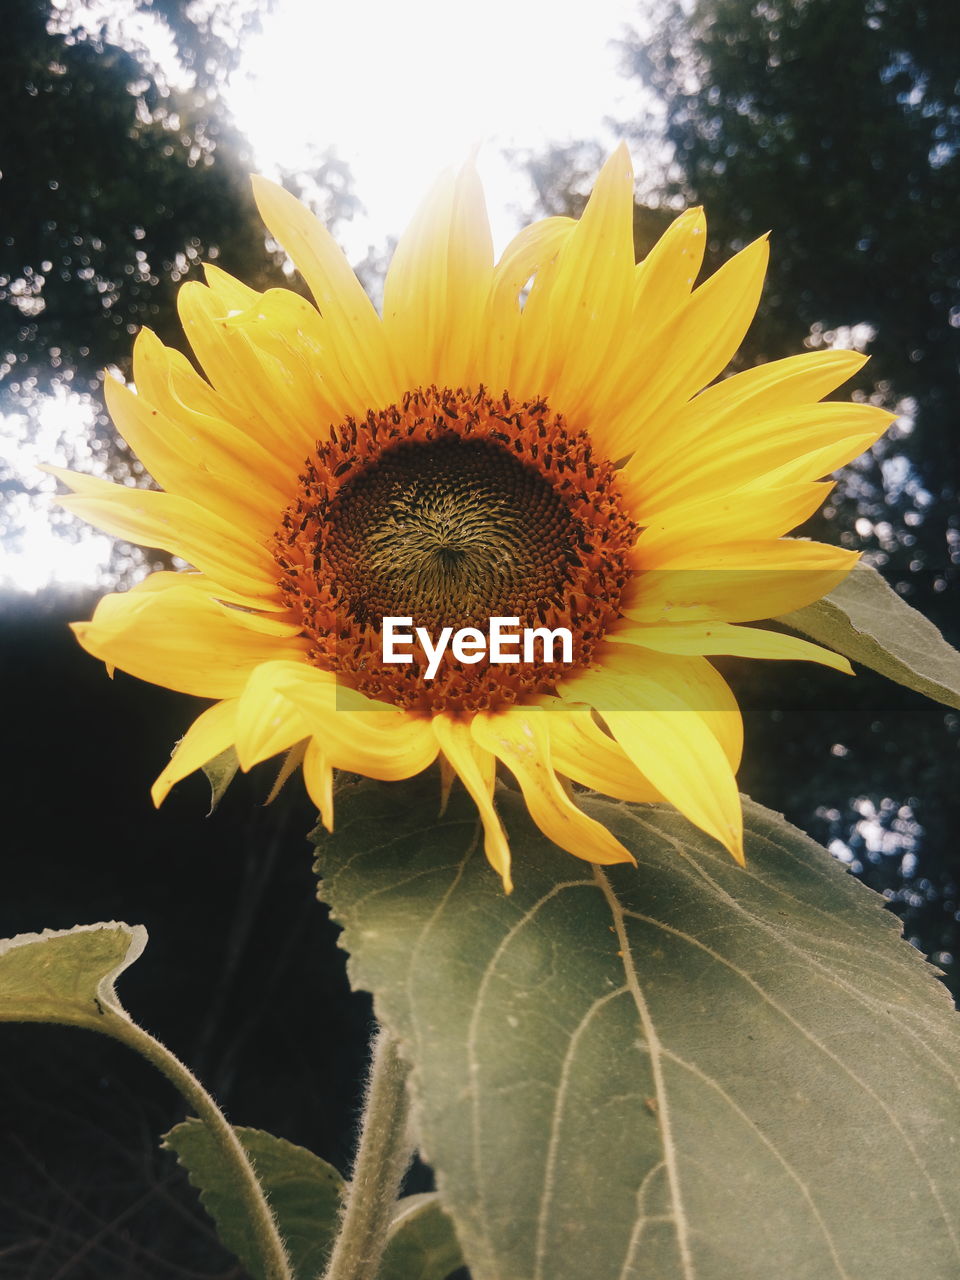 CLOSE-UP OF SUNFLOWERS BLOOMING AGAINST SKY